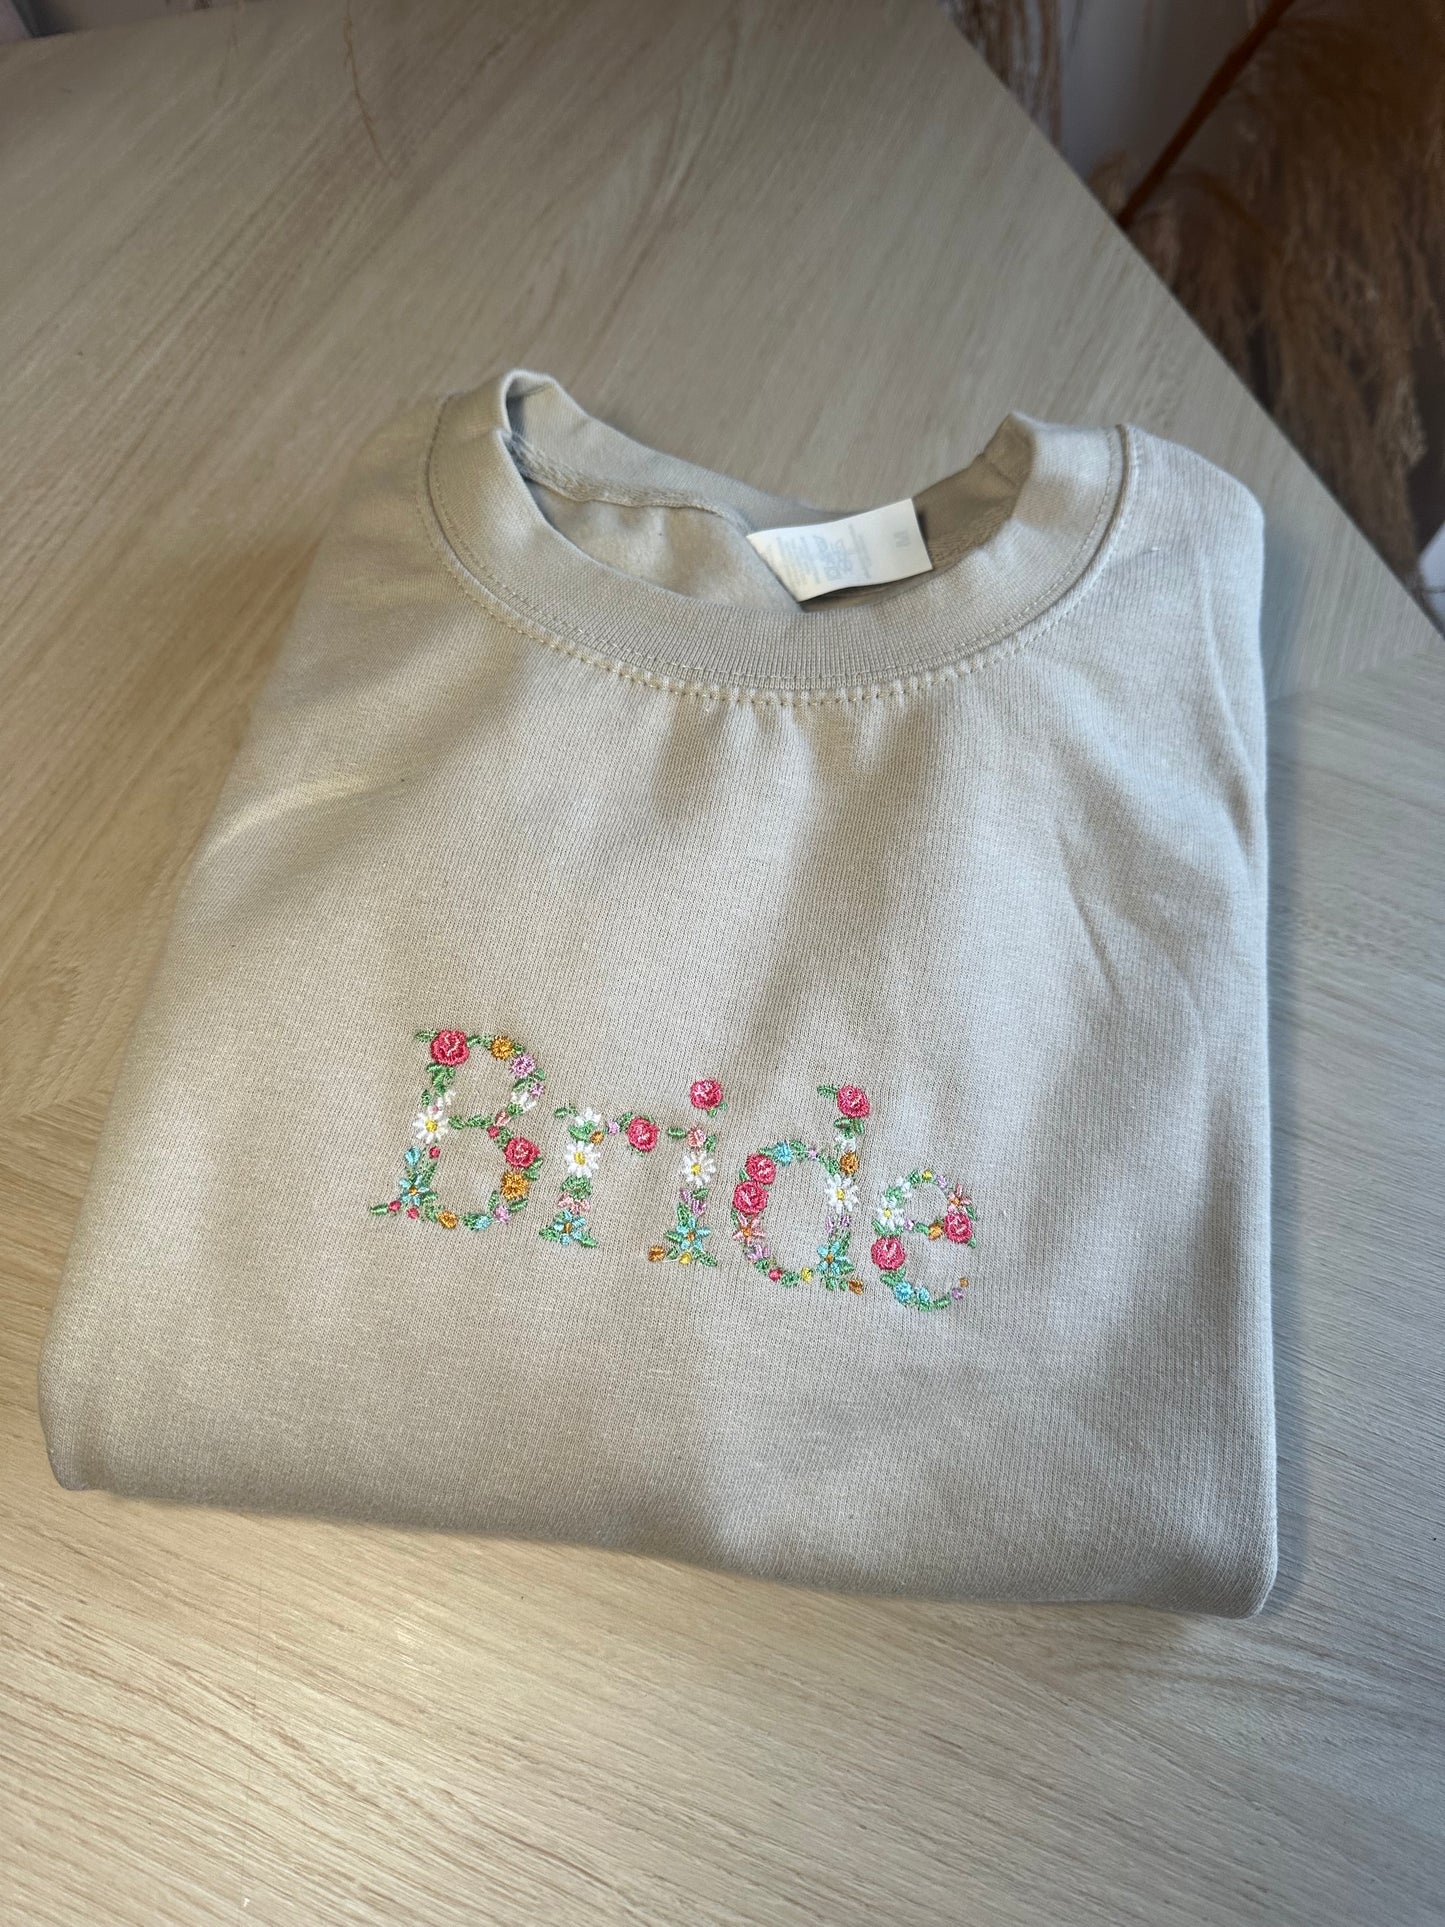 Embroidered Bright Florals Bride sweater